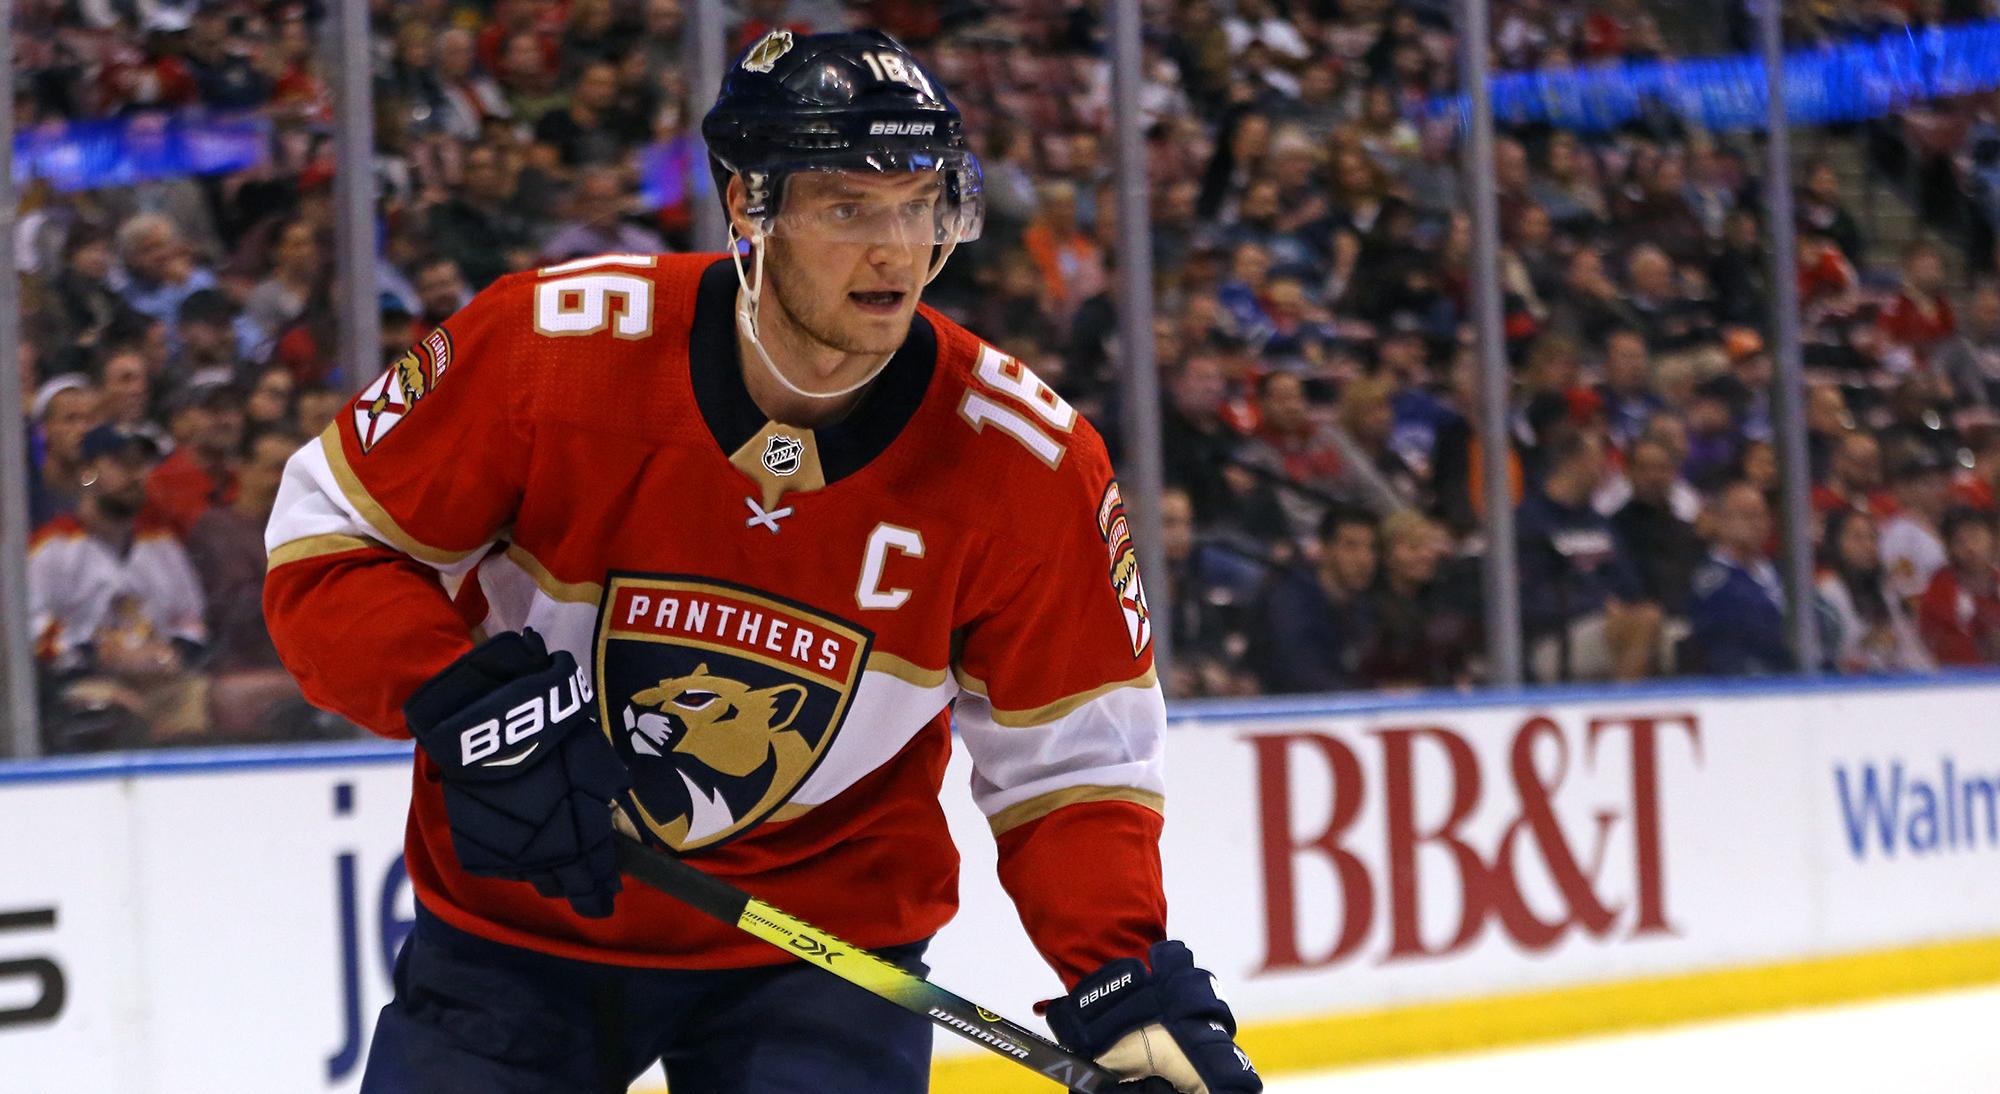 Aleksander Barkov leads a high powered Panthers offense